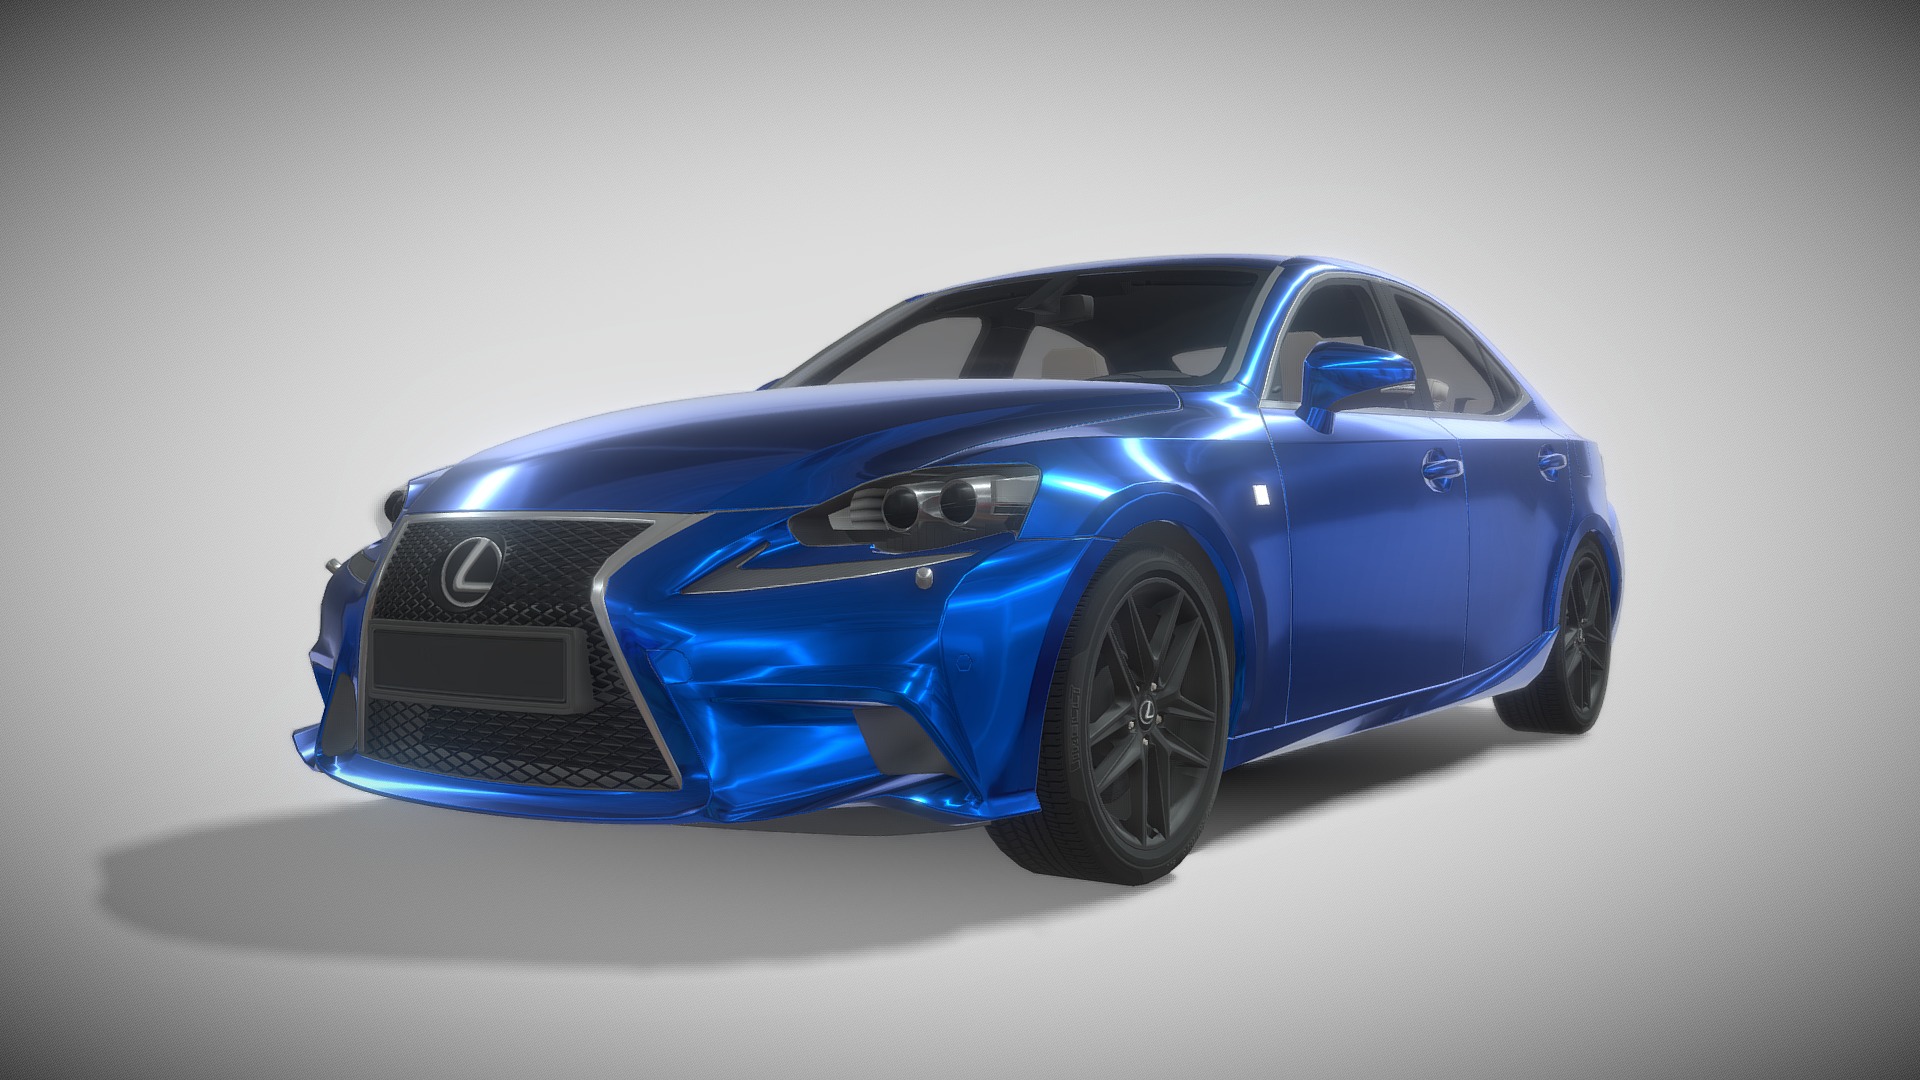 3D model Lexus Luxurycar Sport Model - This is a 3D model of the Lexus Luxurycar Sport Model. The 3D model is about a blue sports car.